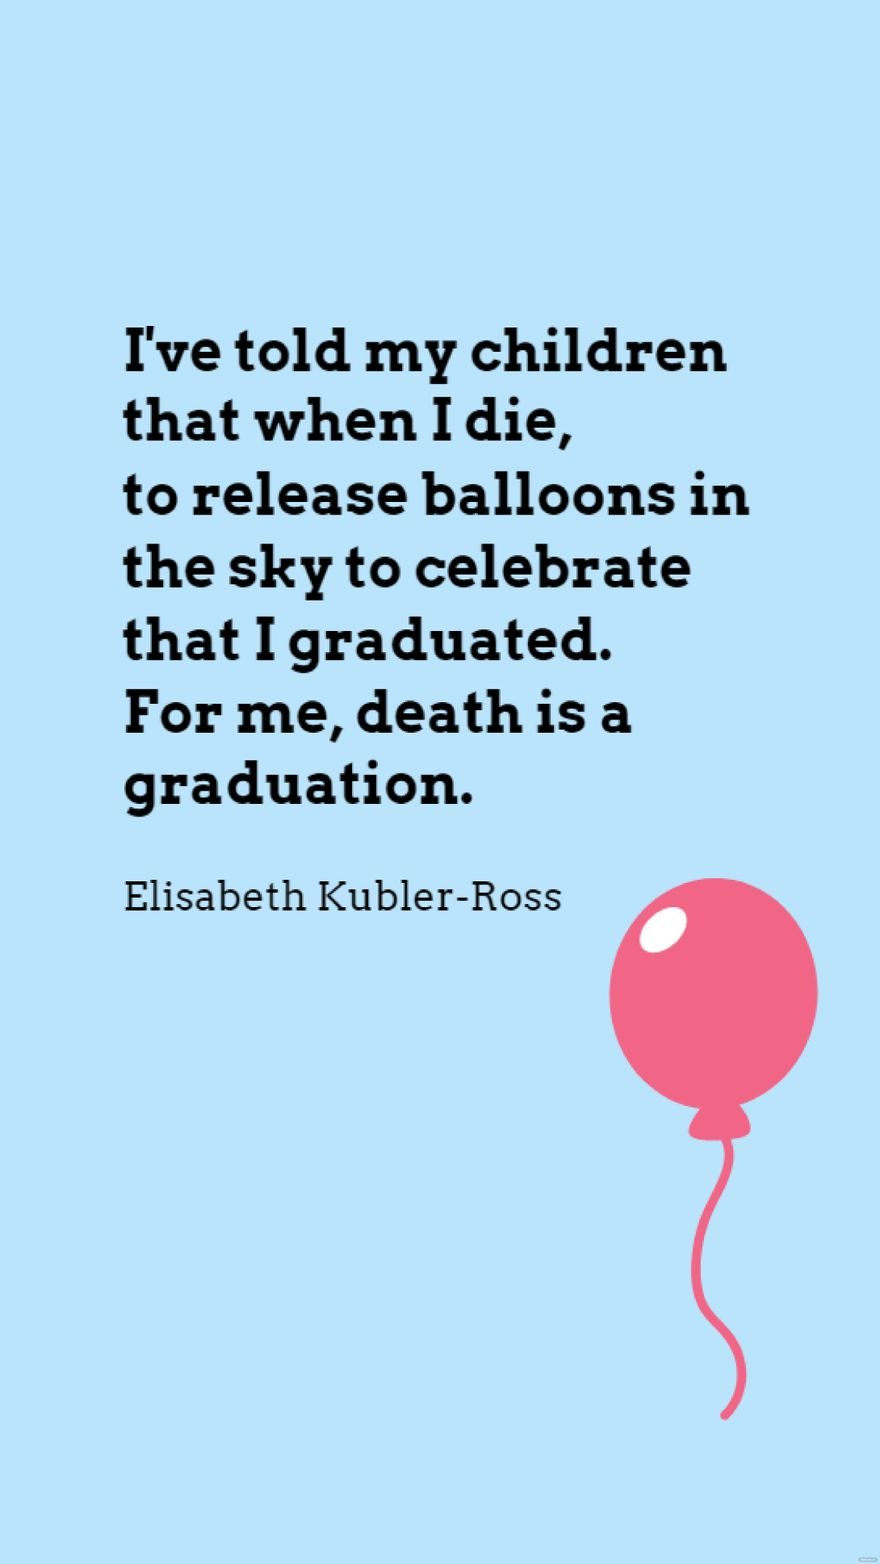 Elisabeth Kubler-Ross - I've told my children that when I die, to release balloons in the sky to celebrate that I graduated. For me, death is a graduation. in JPG